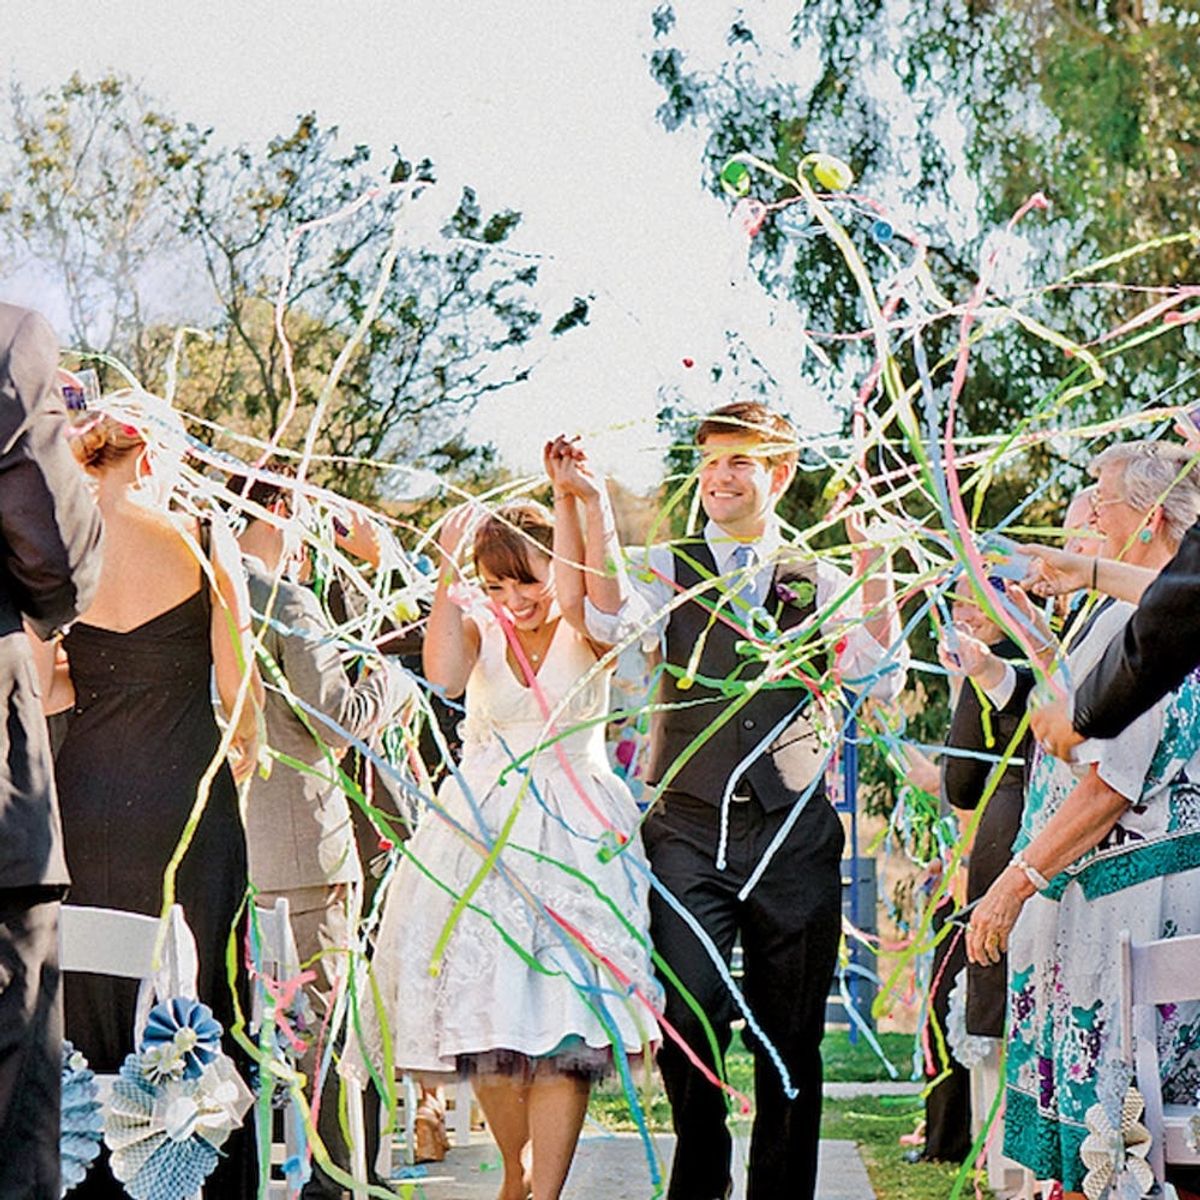 18 Things to Throw at Your Wedding Instead of Rice